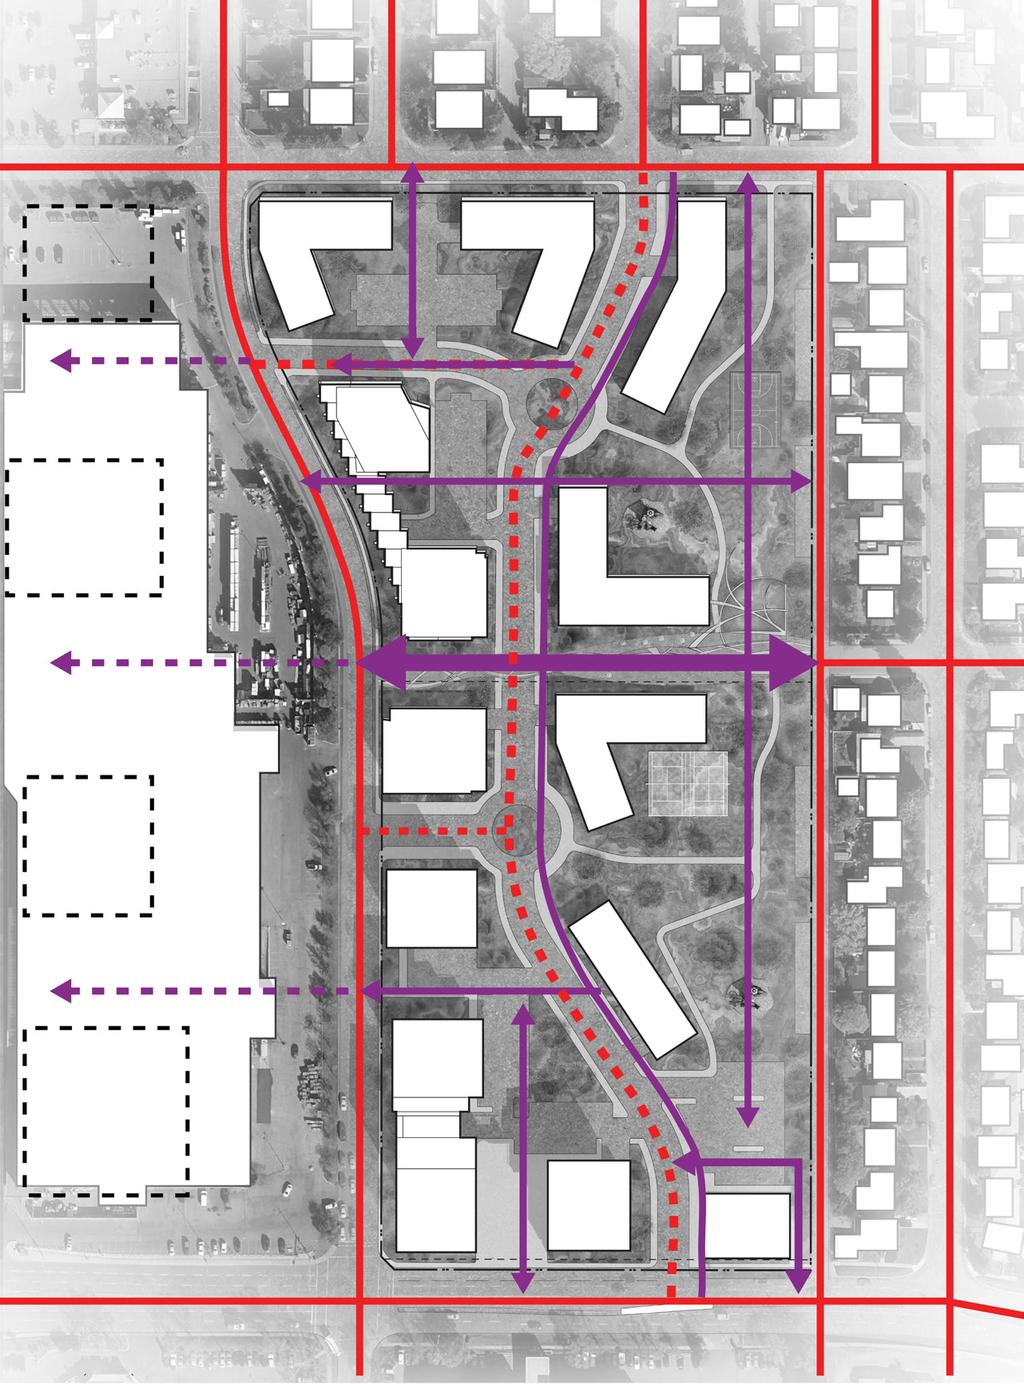 Traffic Community input: Reduce the impact on traffic in the area. RESPONSE: Proximity to transit, particularly the Southland LRT station, is a key factor in this redevelopment.